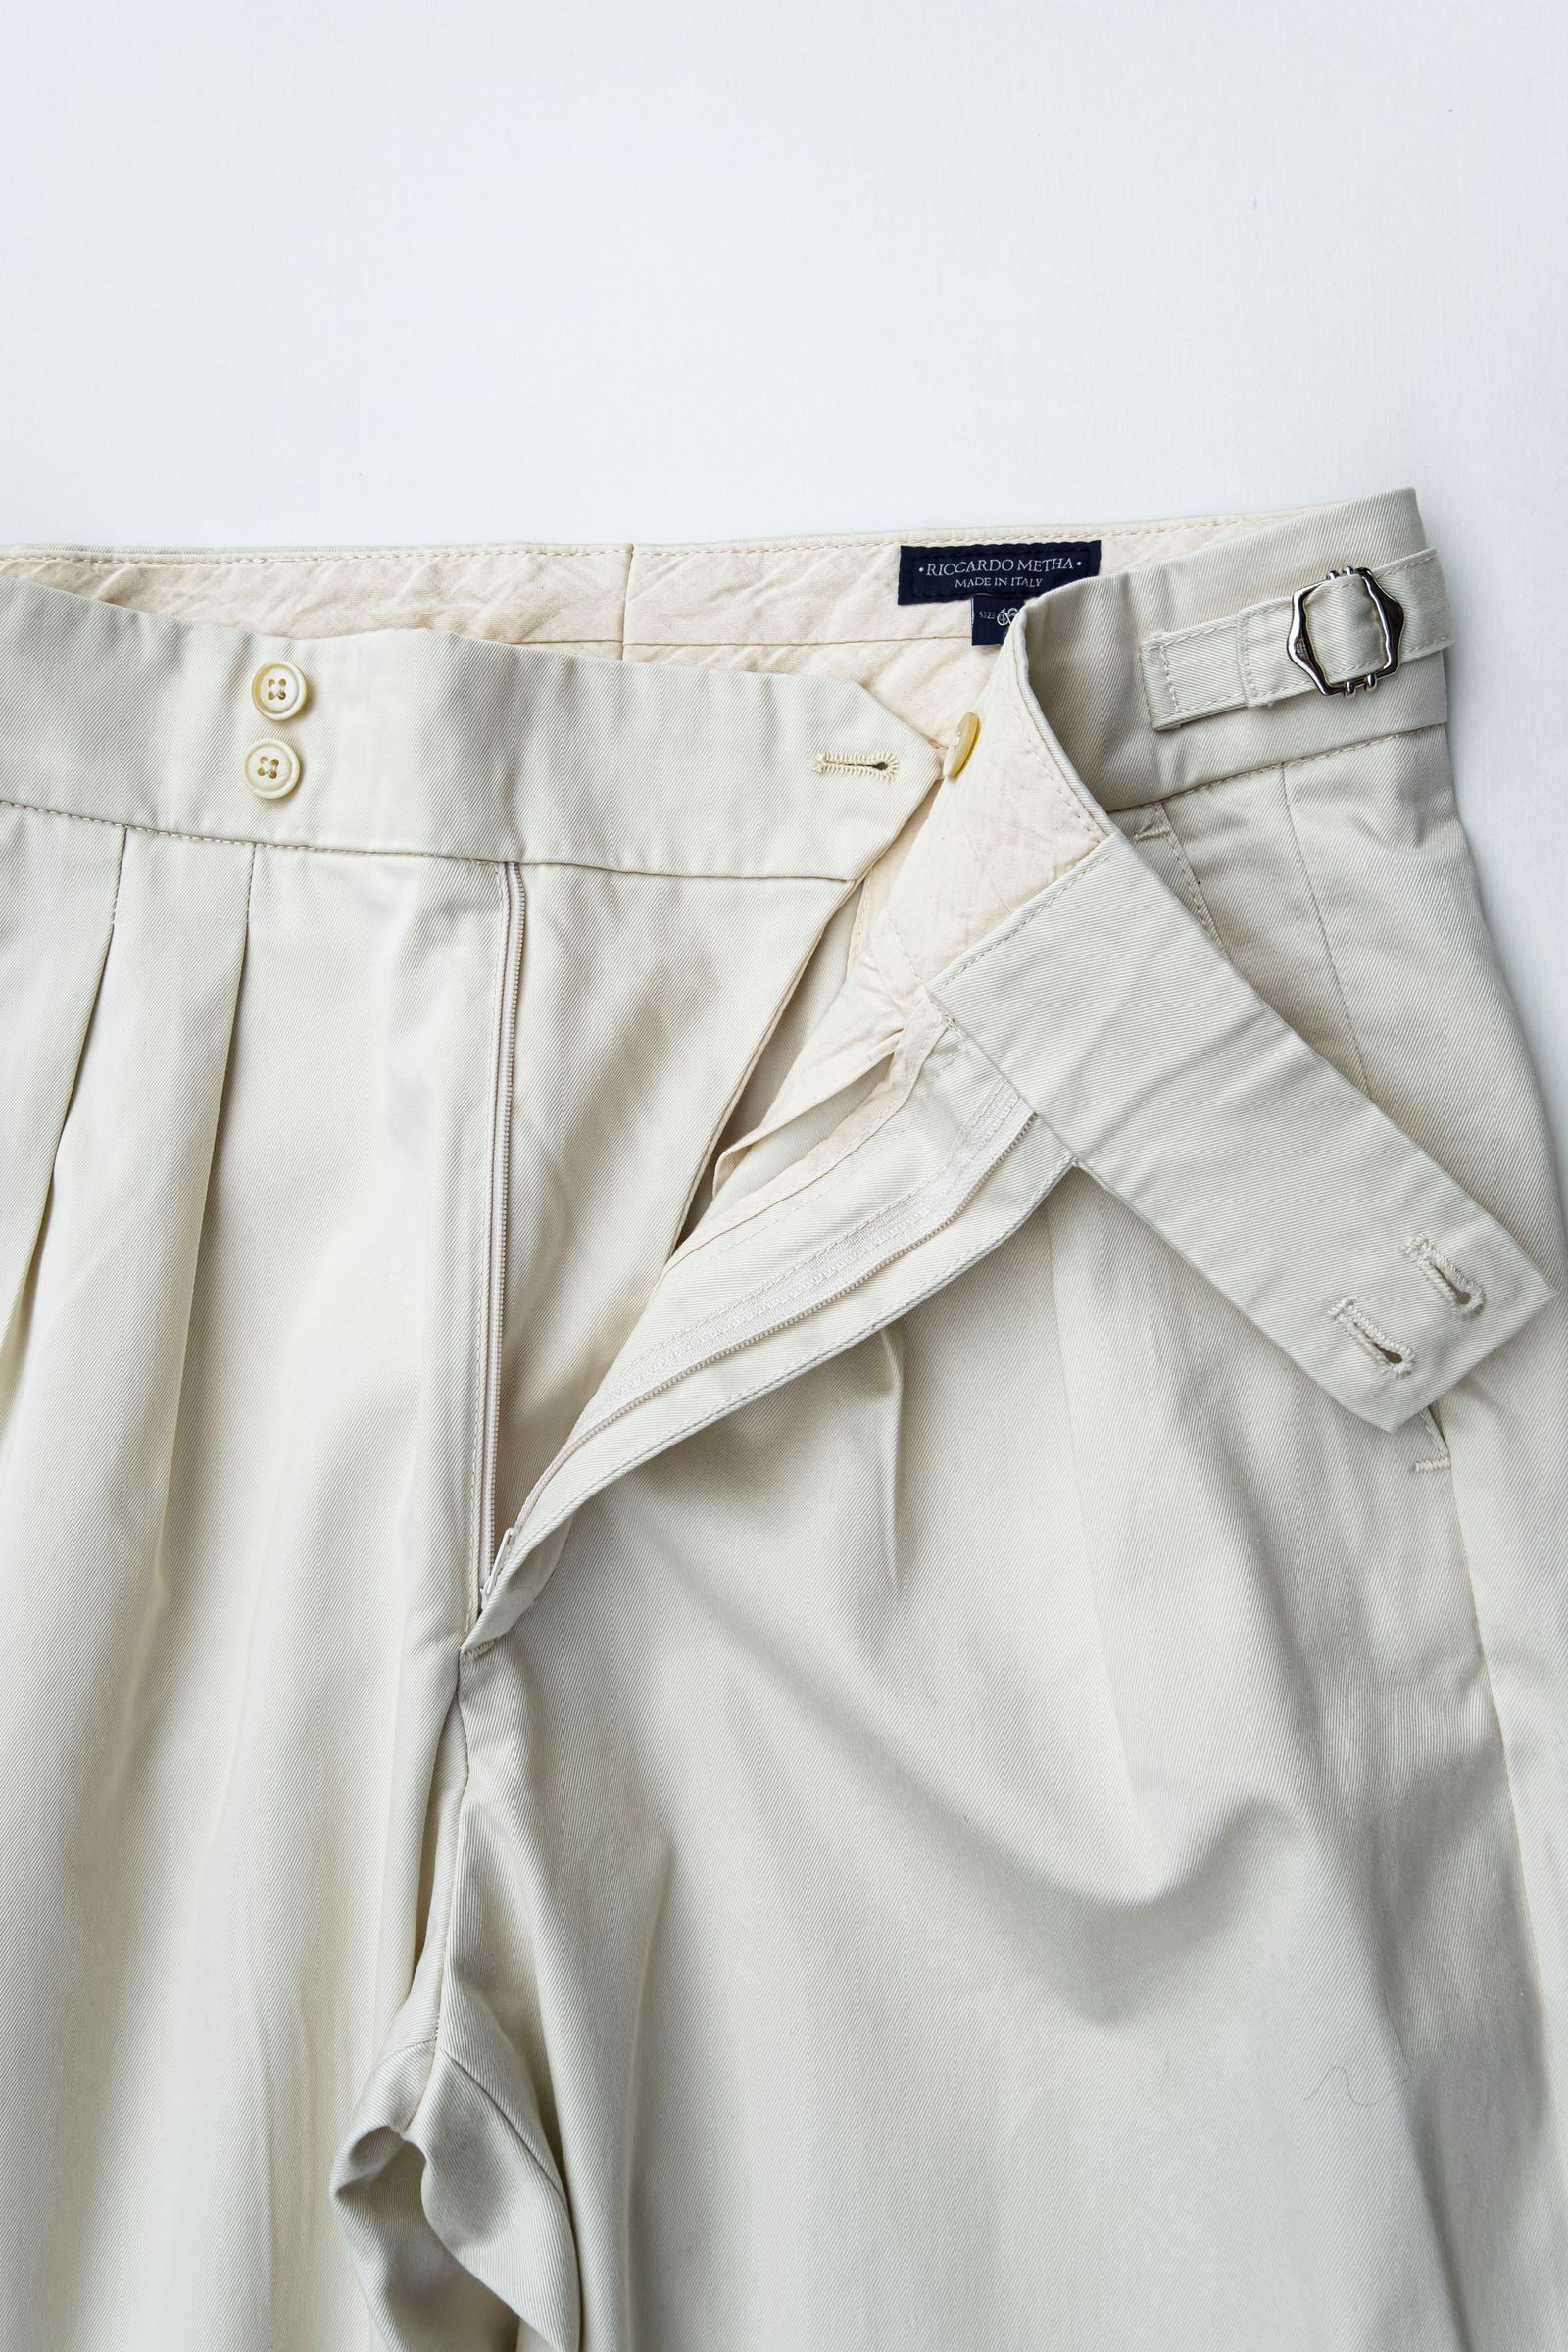 RICCARDO METHA - NEW 2TUCK BELTLESS TROUSERS COLD MATCED / OFF ...